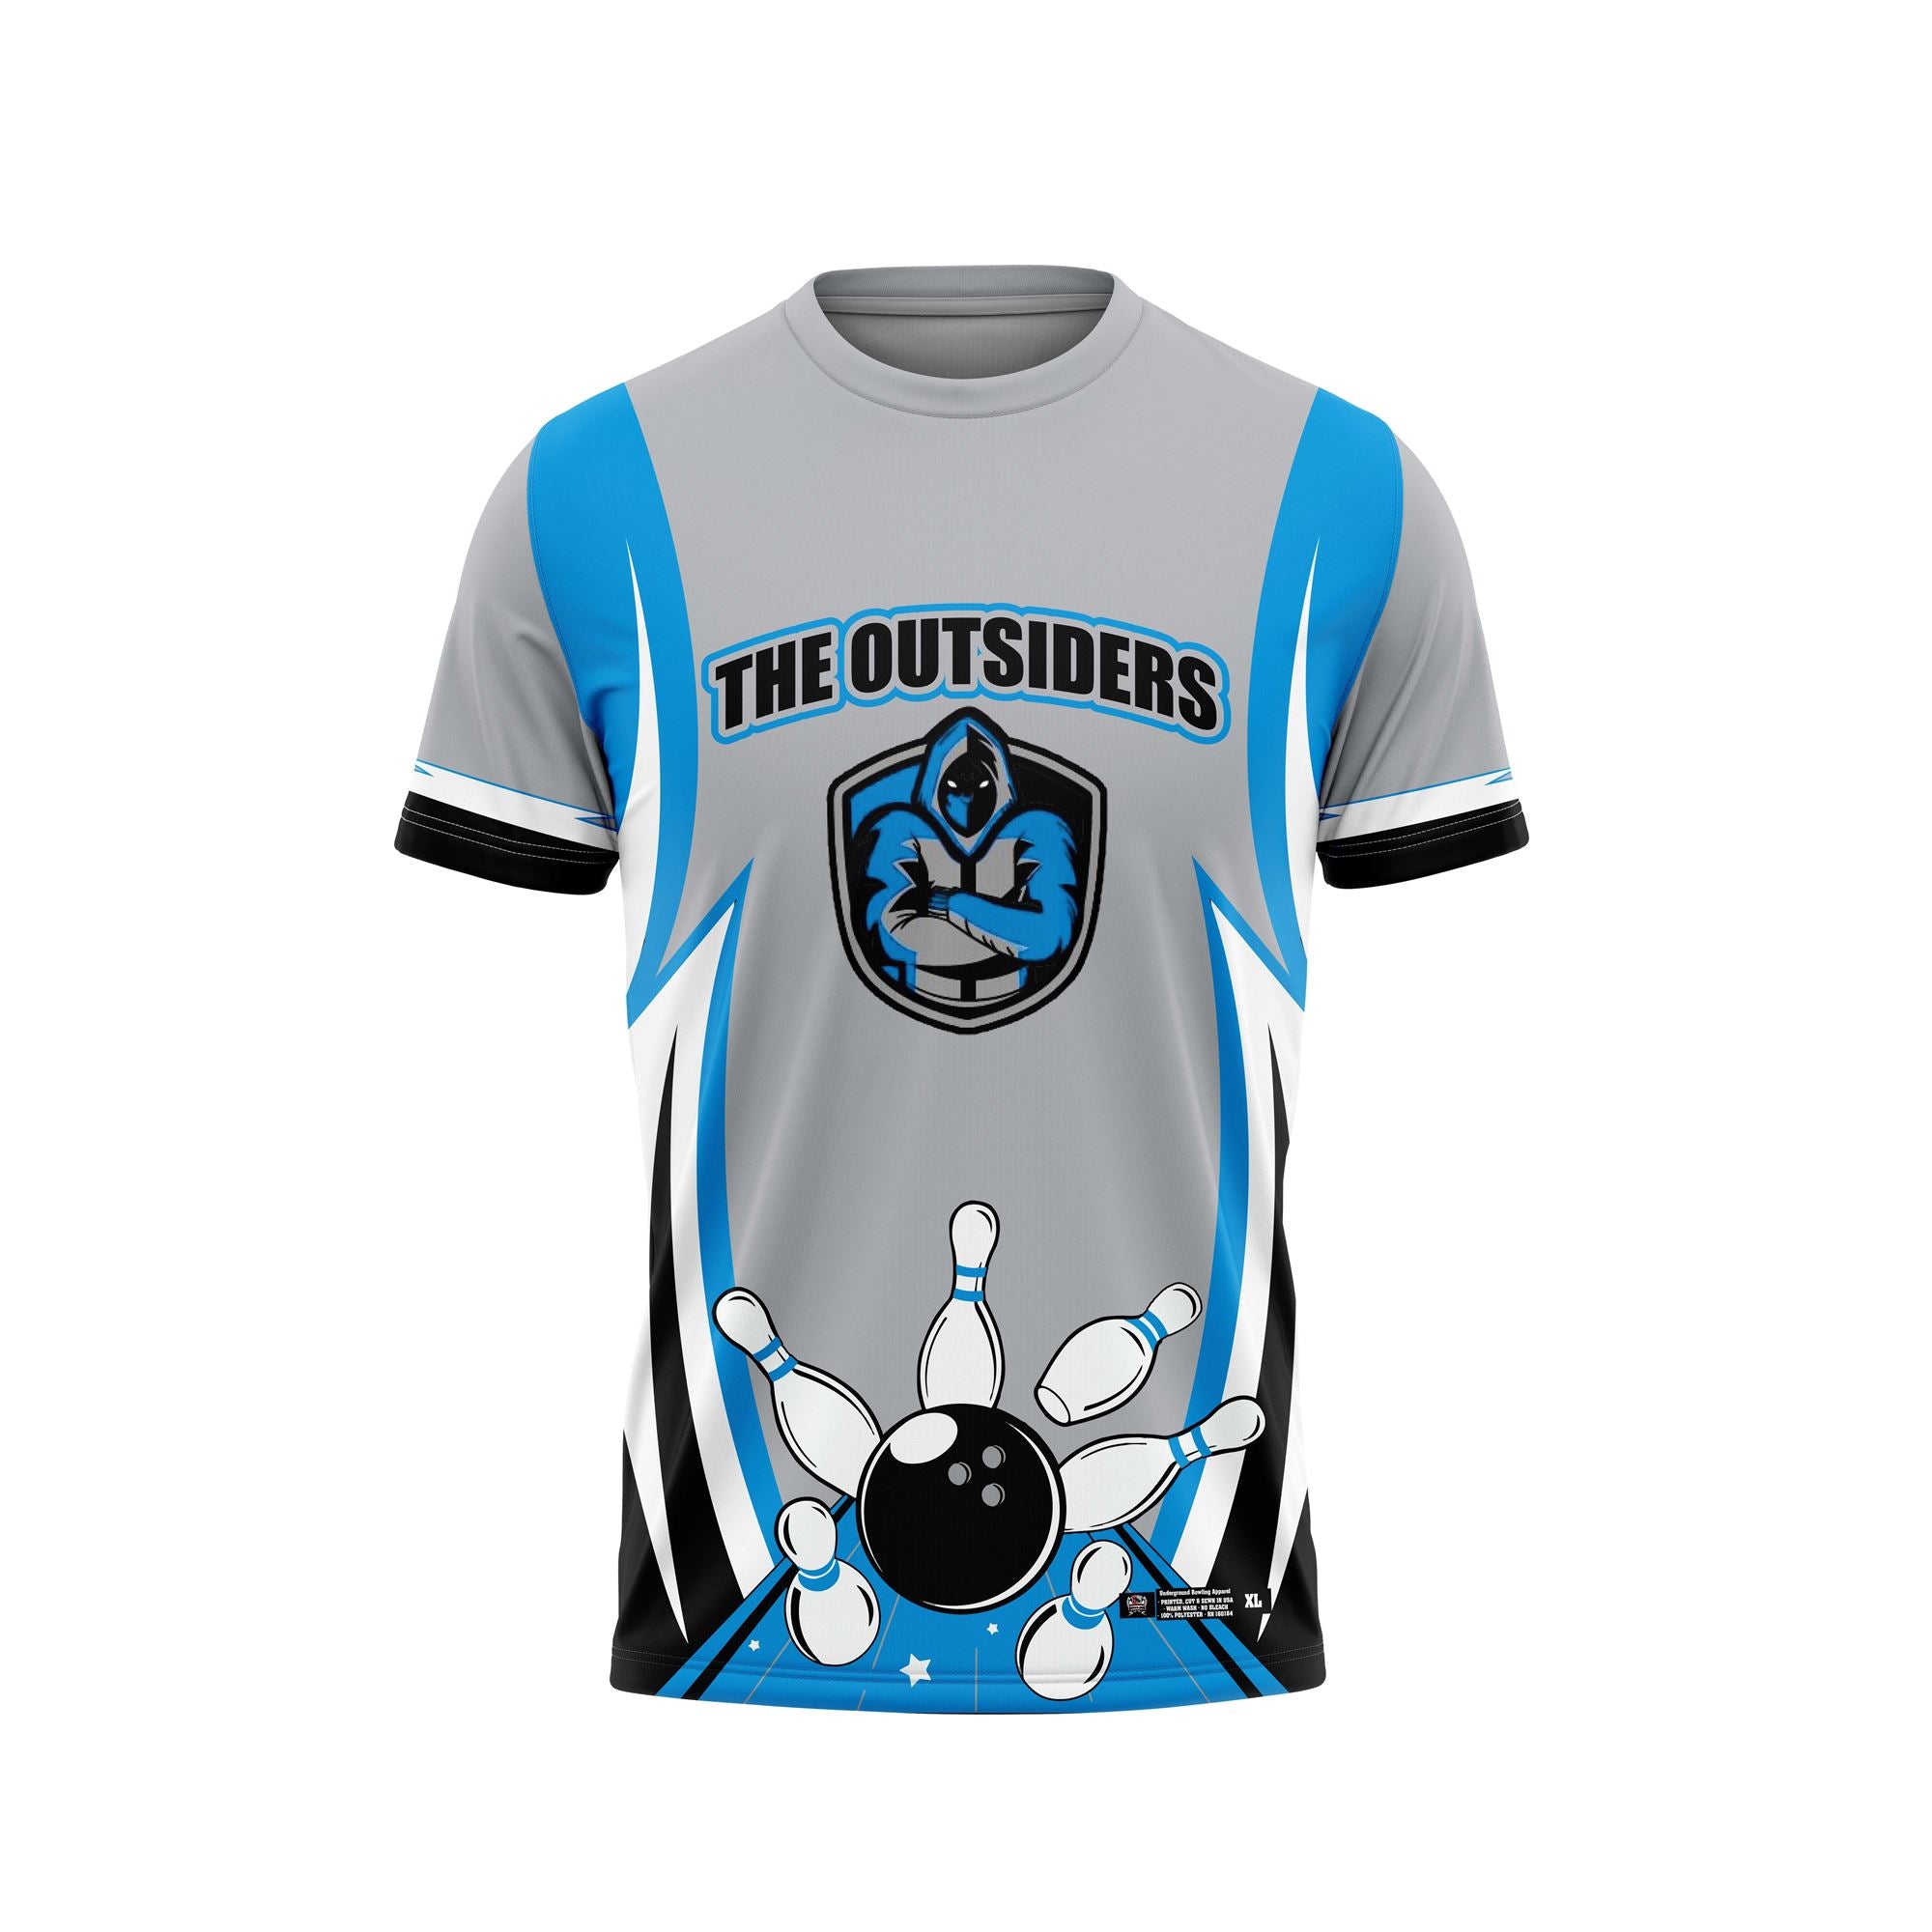 The Outsiders Grey Jersey